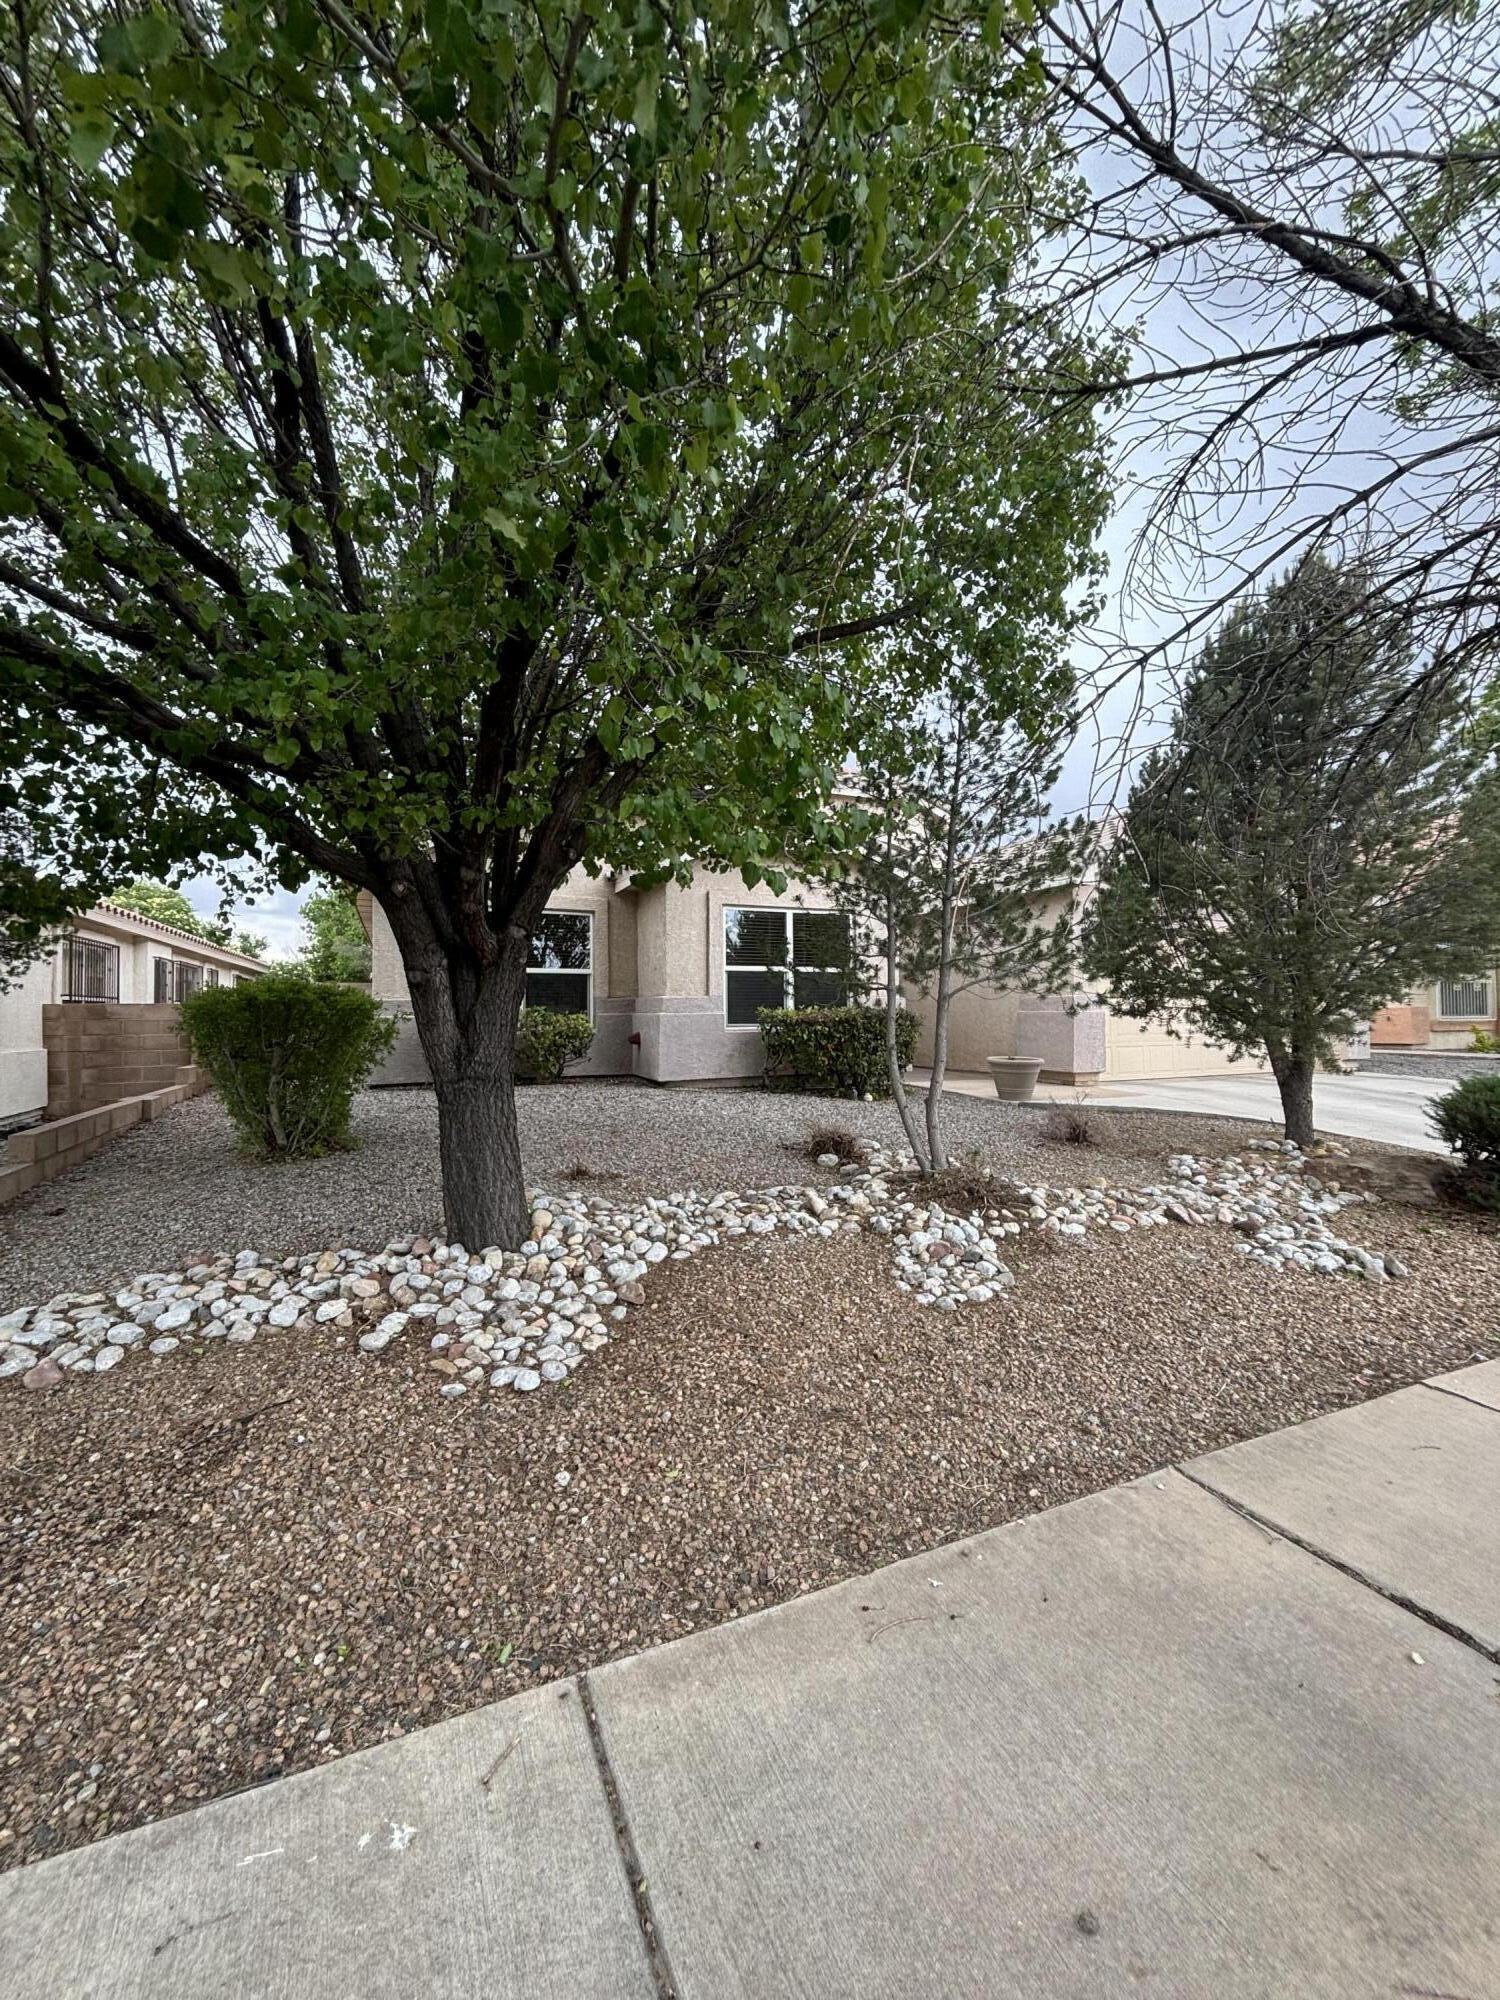 Welcome to your new  eco-friendly home in a quiet, lovely neighborhood on the West Side. Practically next door to the Petroglyph National Monument, this home has an updated backsplash, sink, overhead vent, and resurfaced countertops. The home features 3 bedrooms and a generous sized office/study, plus 2+ living areas. This beautifully landscaped house is elegant and well cared-for by the owners. And as an added bonus, enjoy the low electric bills because of the solar panels! Come and take a look at this gem.